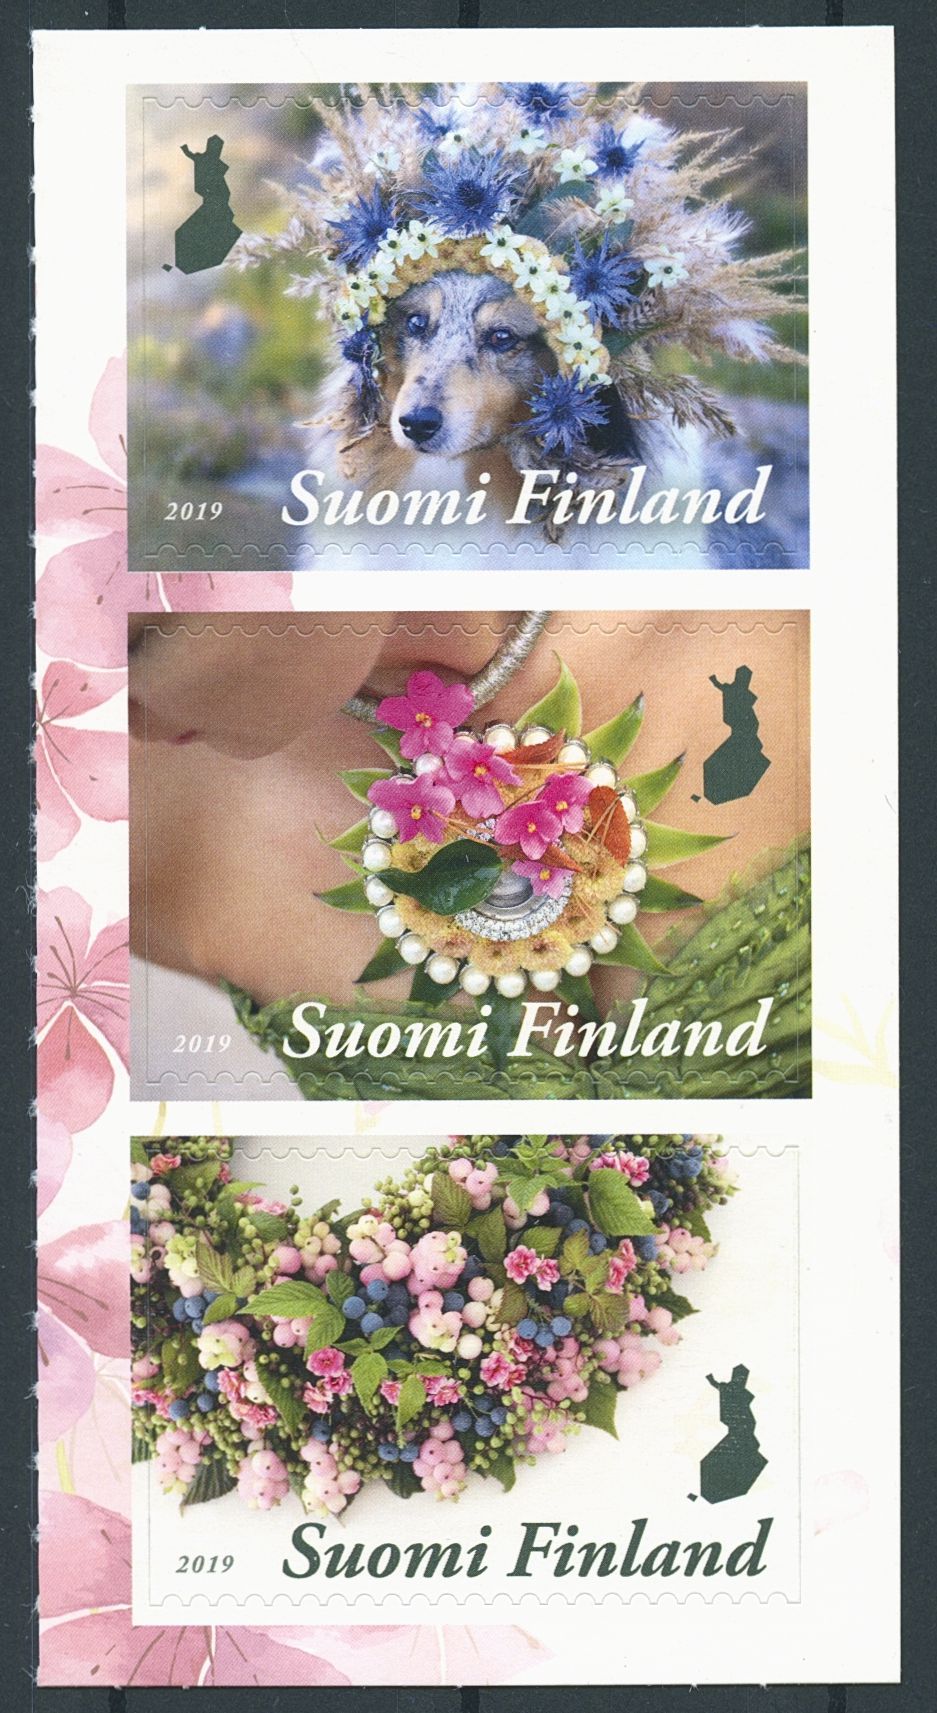 Finland 2019 MNH Floral Artistry 3v S/A Set Dogs Flowers Plants Nature Stamps